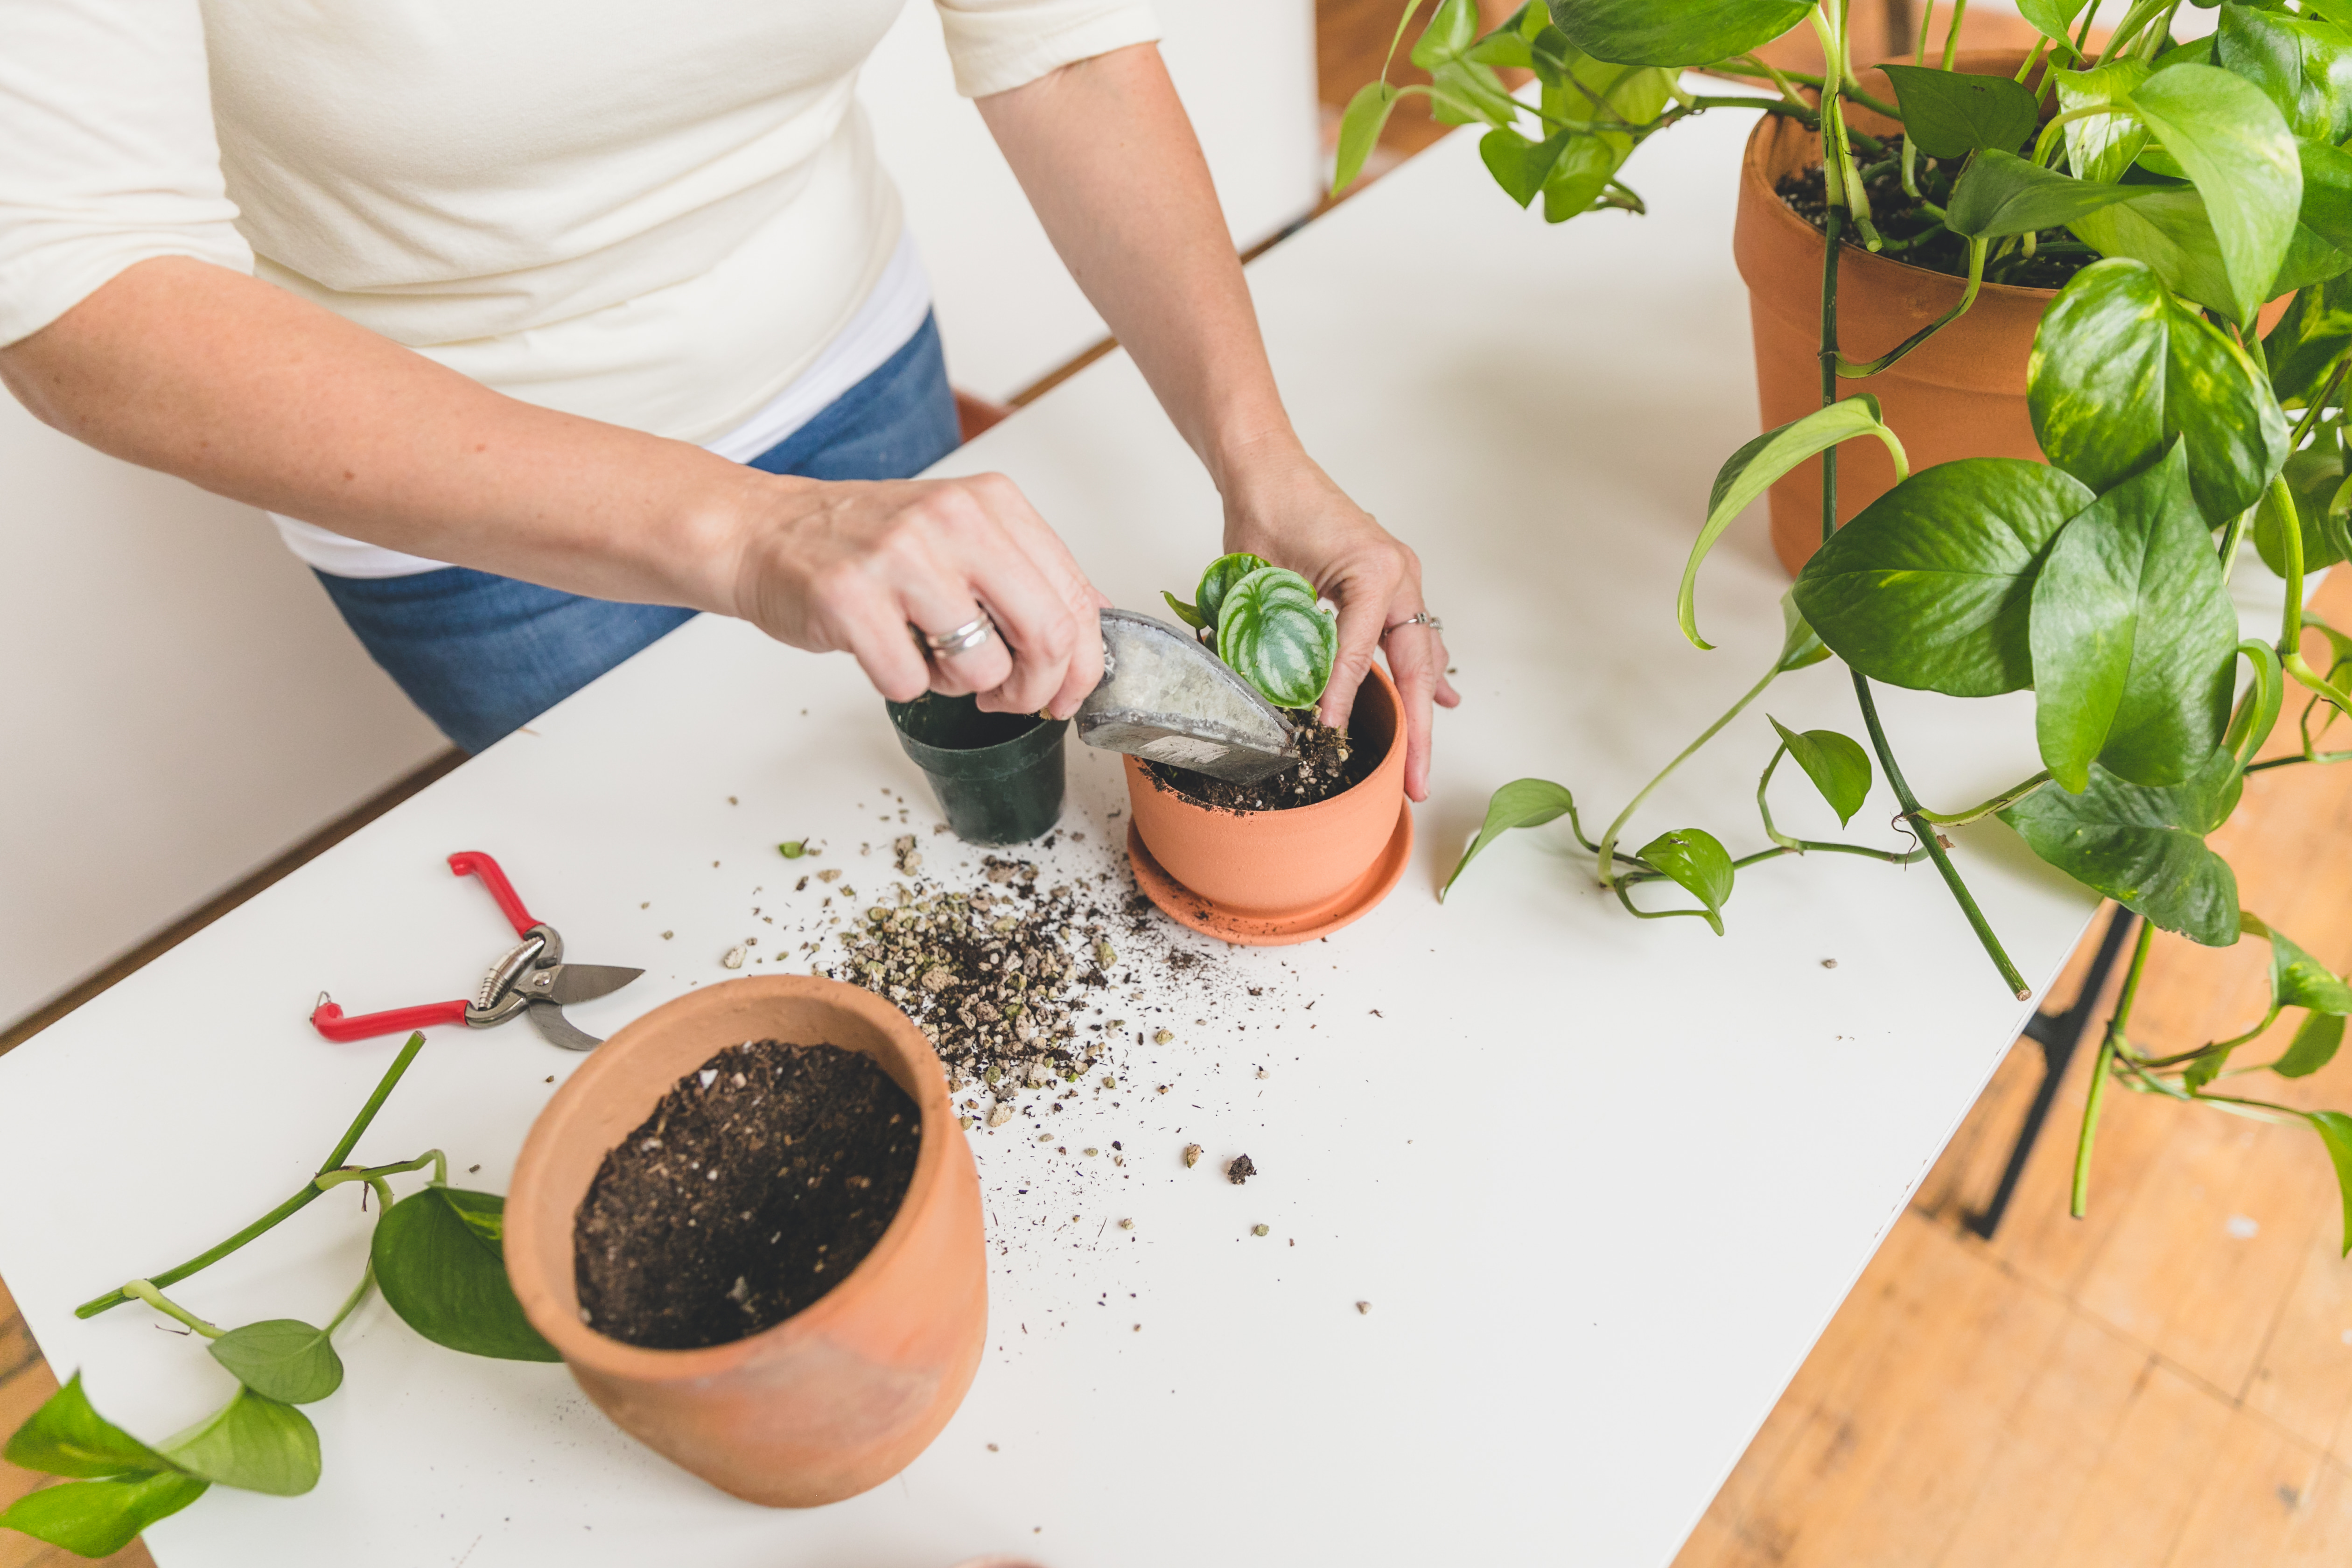 Learn step by step how to re-pot a houseplant from blogger Clever Bloom #houseplant #plantcare #plantlady